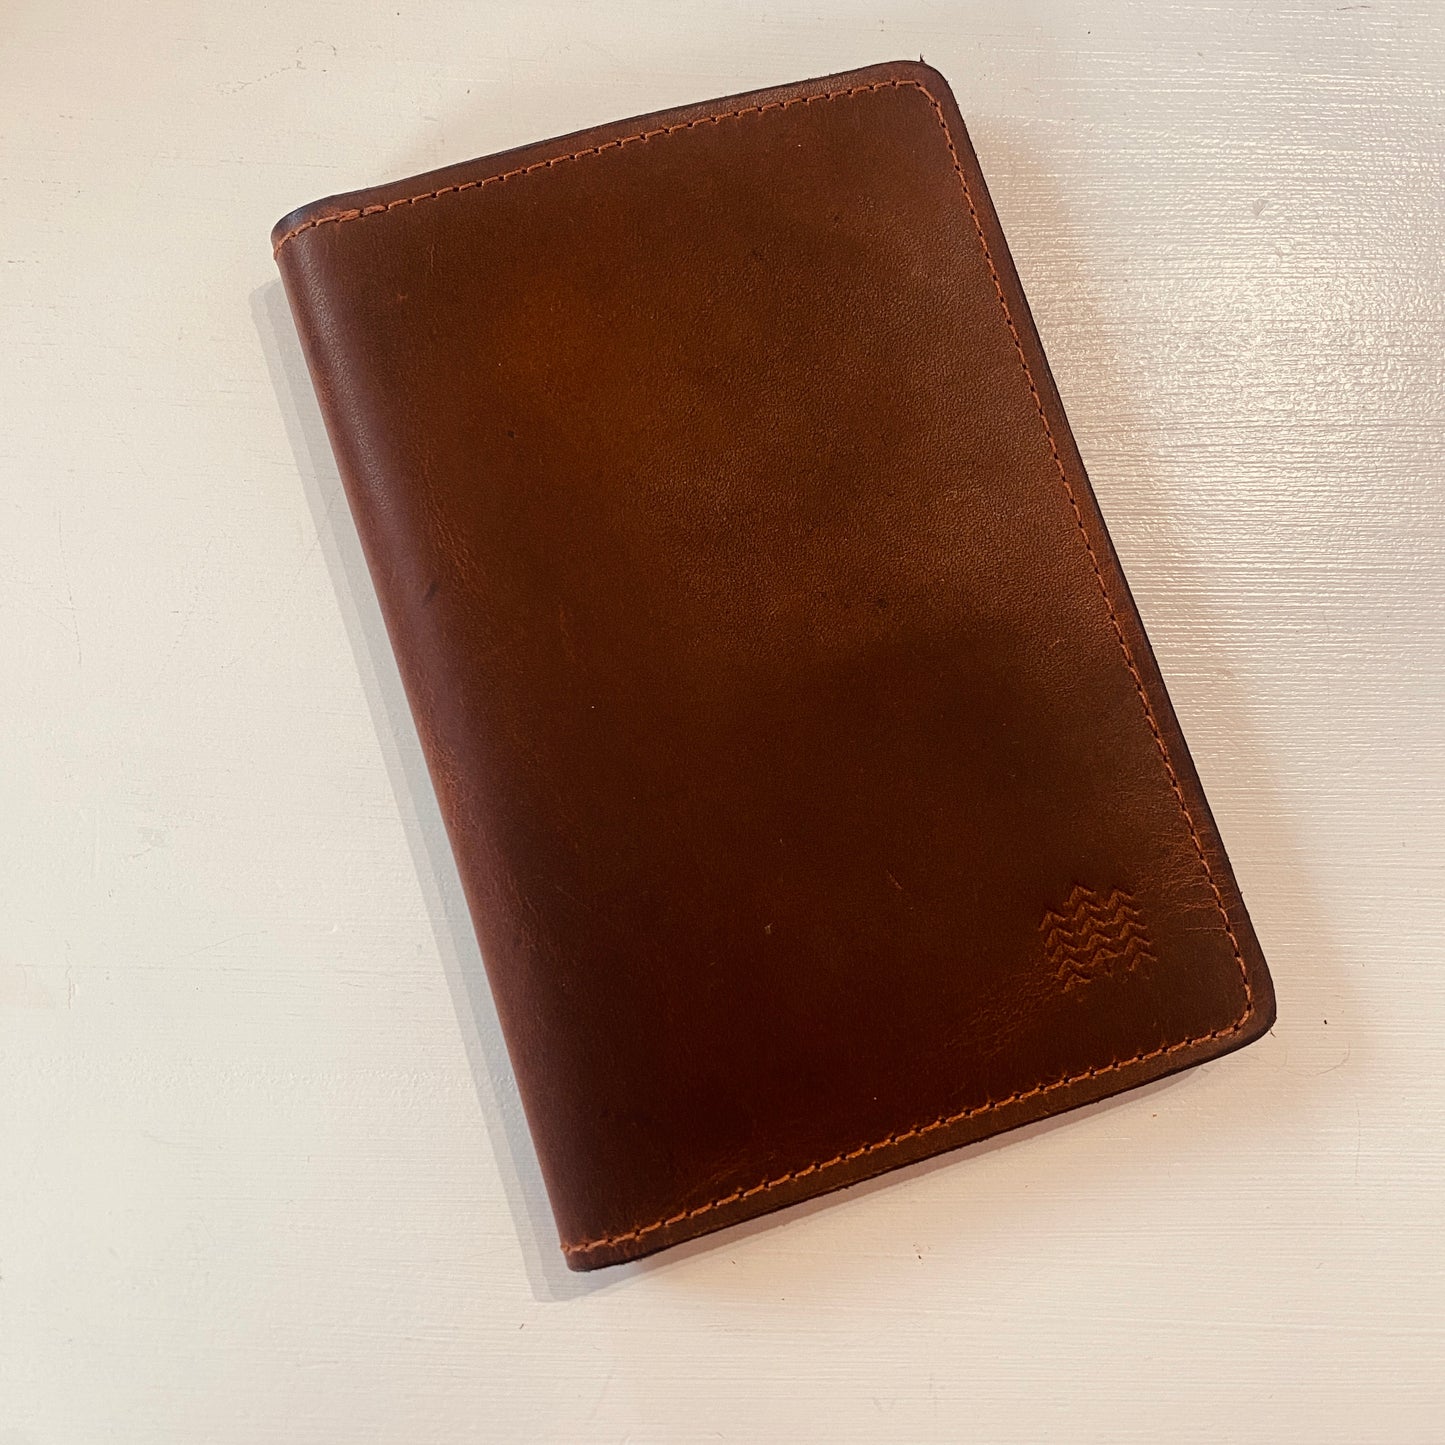 Kennedy & Co. - Field Notes